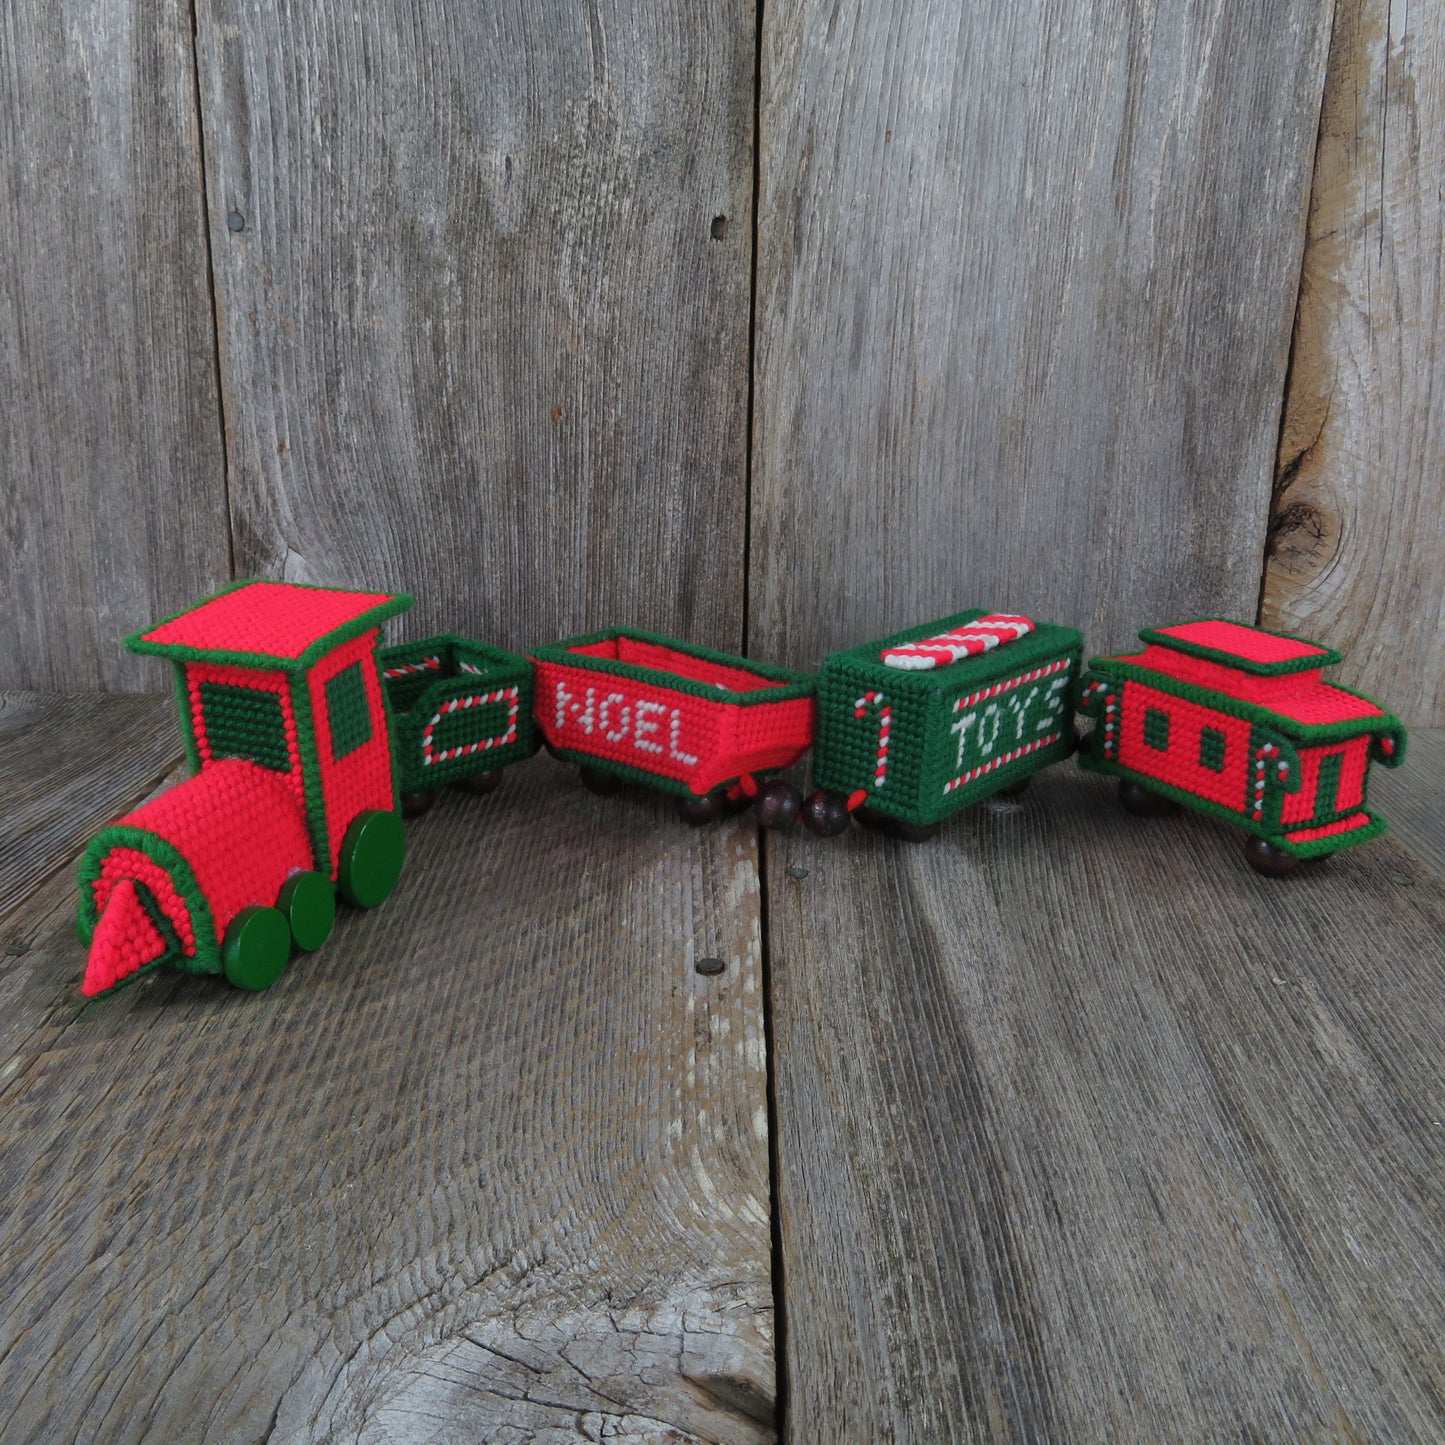 Vintage Train Candy Dish Christmas Plastic Canvas Needlepoint Handmade Decoration Red Green Caboose